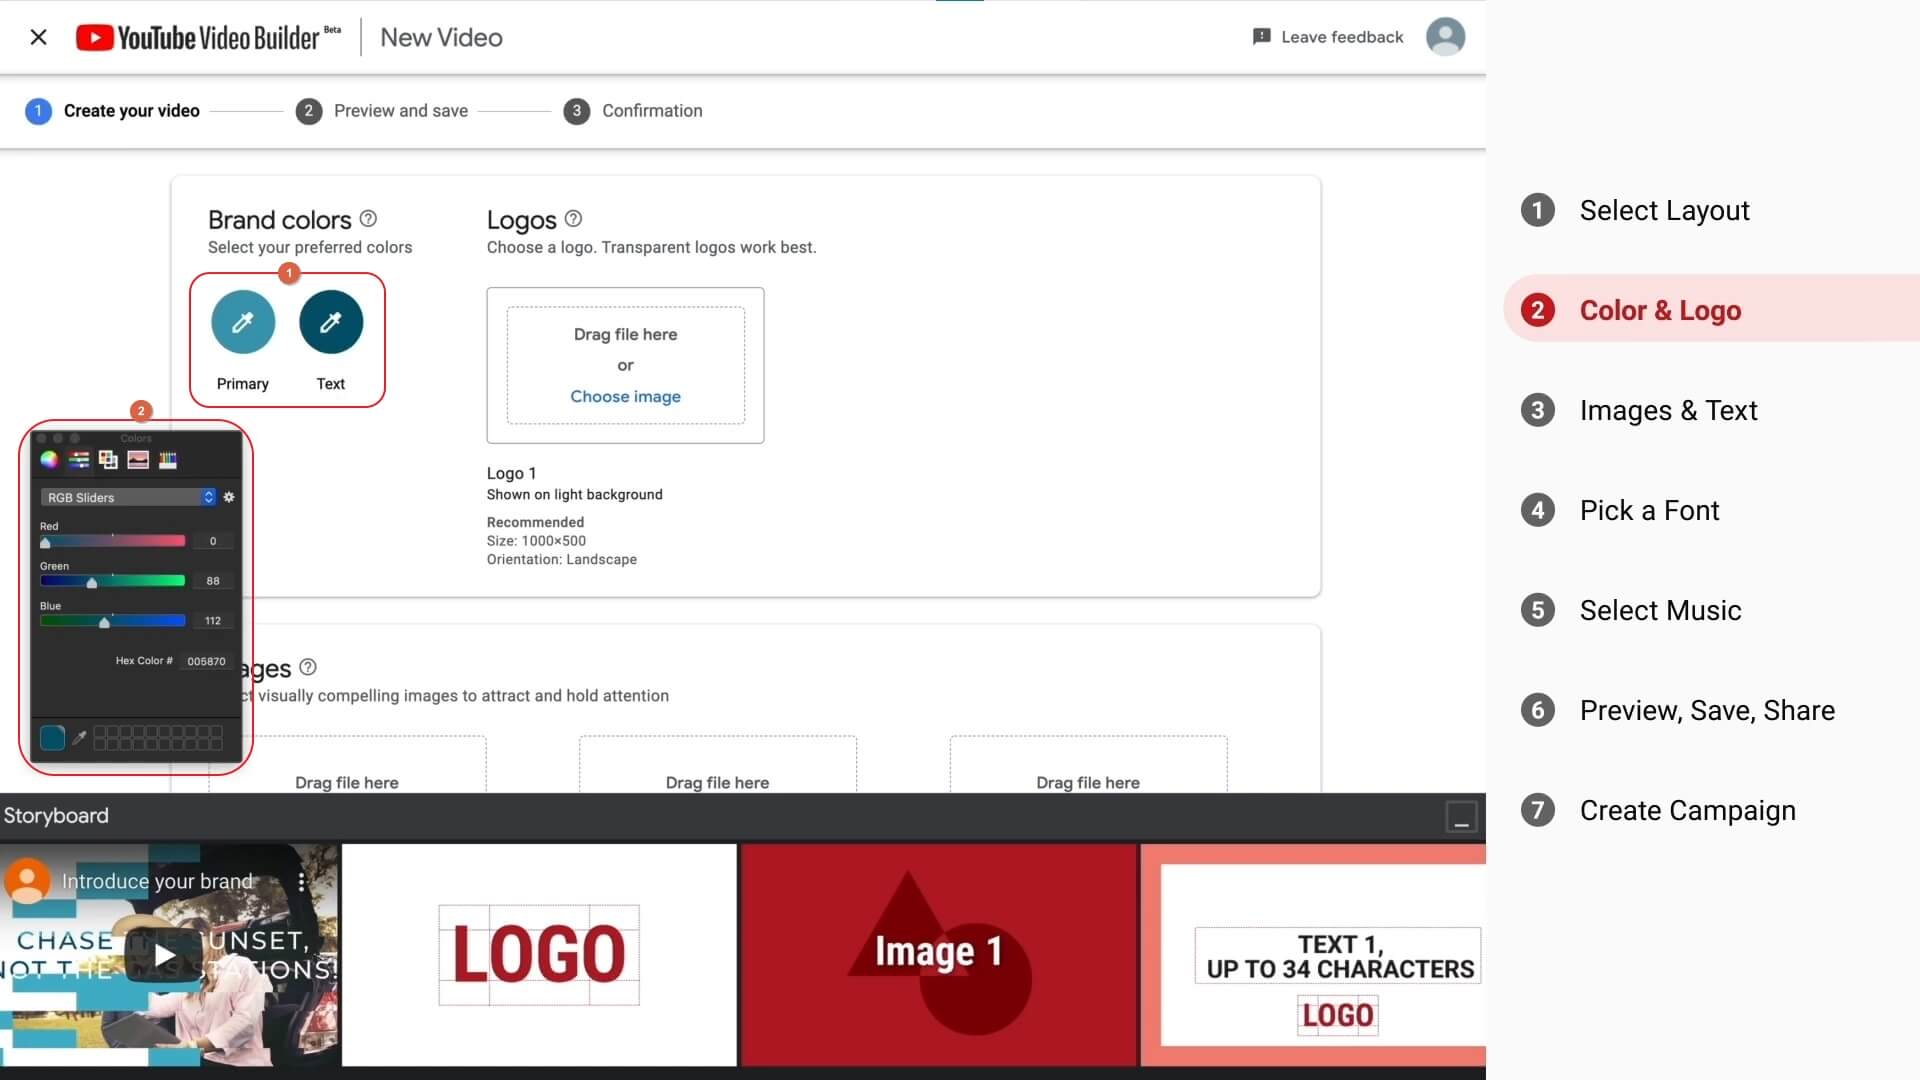 Create video with YouTube Video Builder 